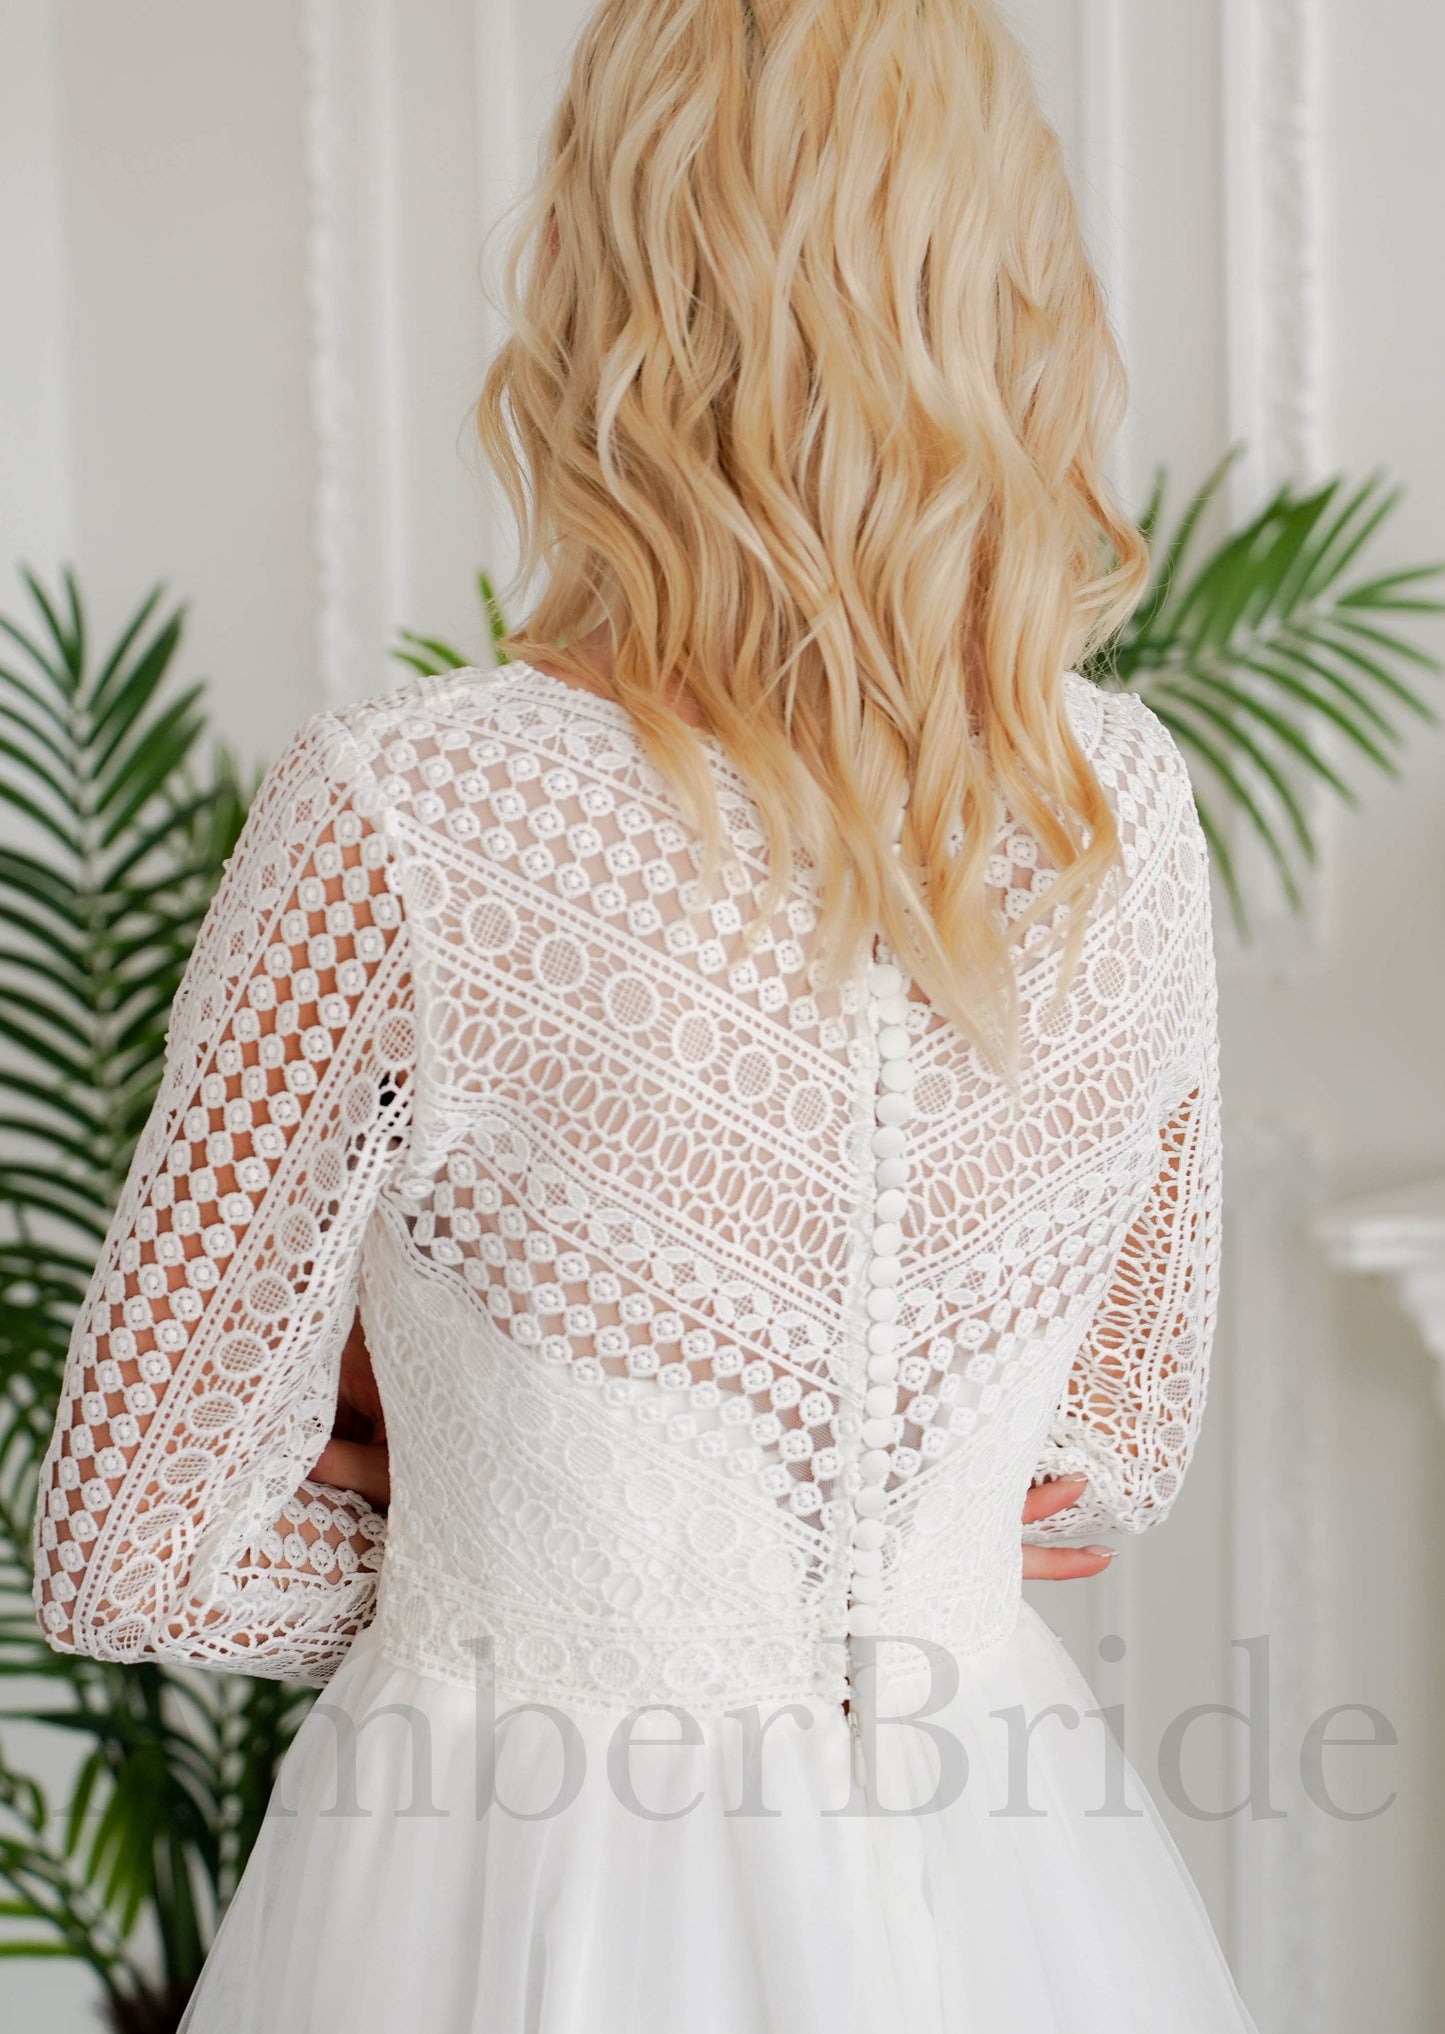 Boho Lace Wedding Dress with Long Sleeve and Tulle Skirt